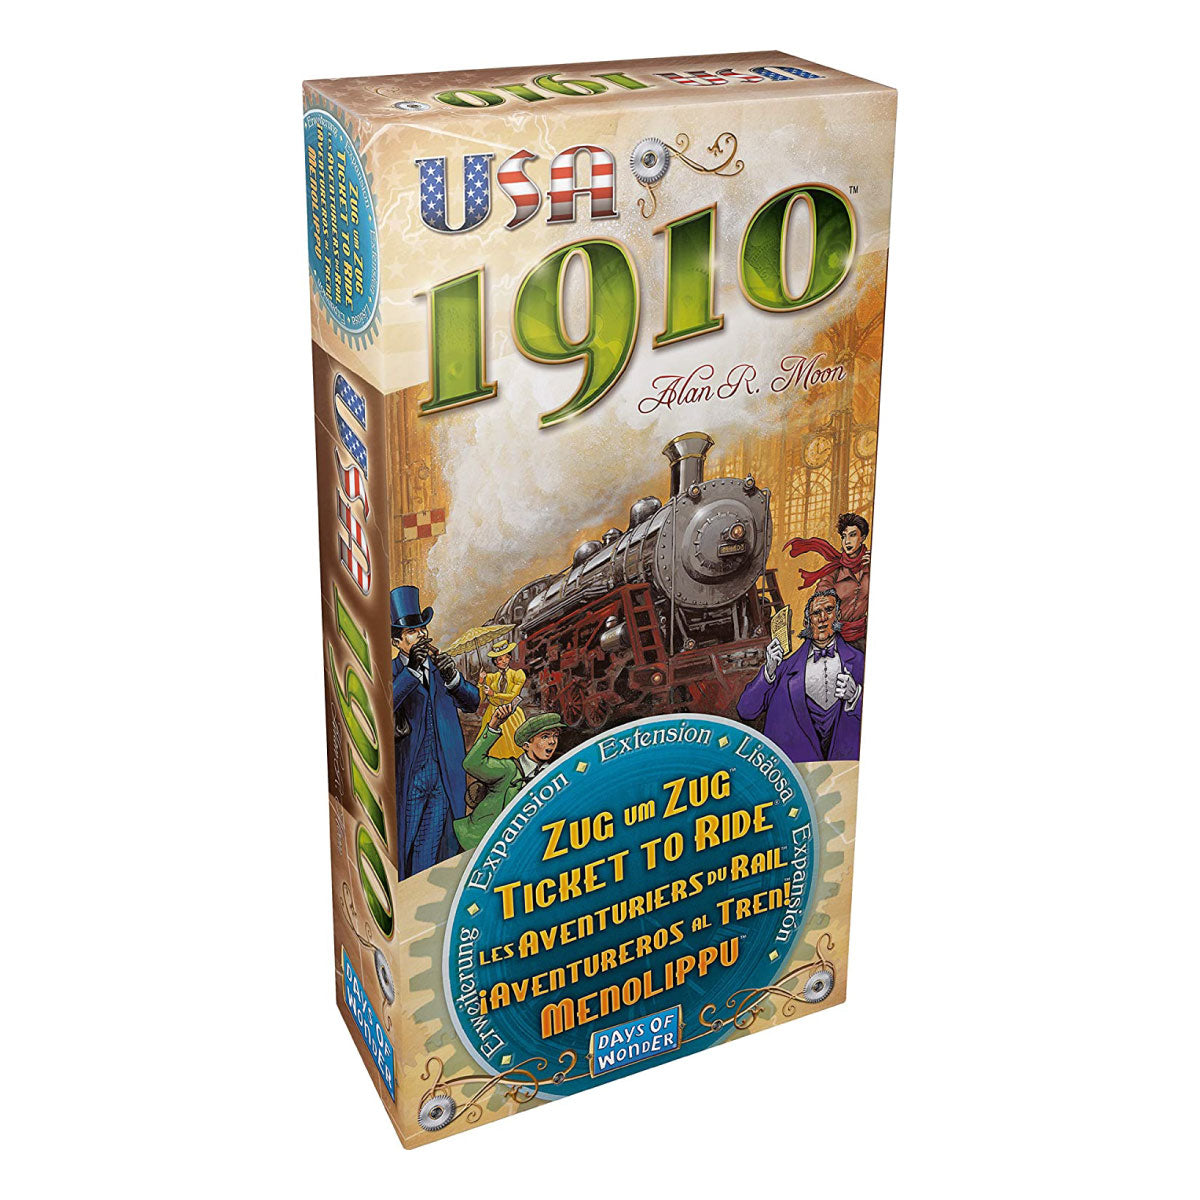 Ticket to Ride - USA 1910 Expansion from Days of Wonder